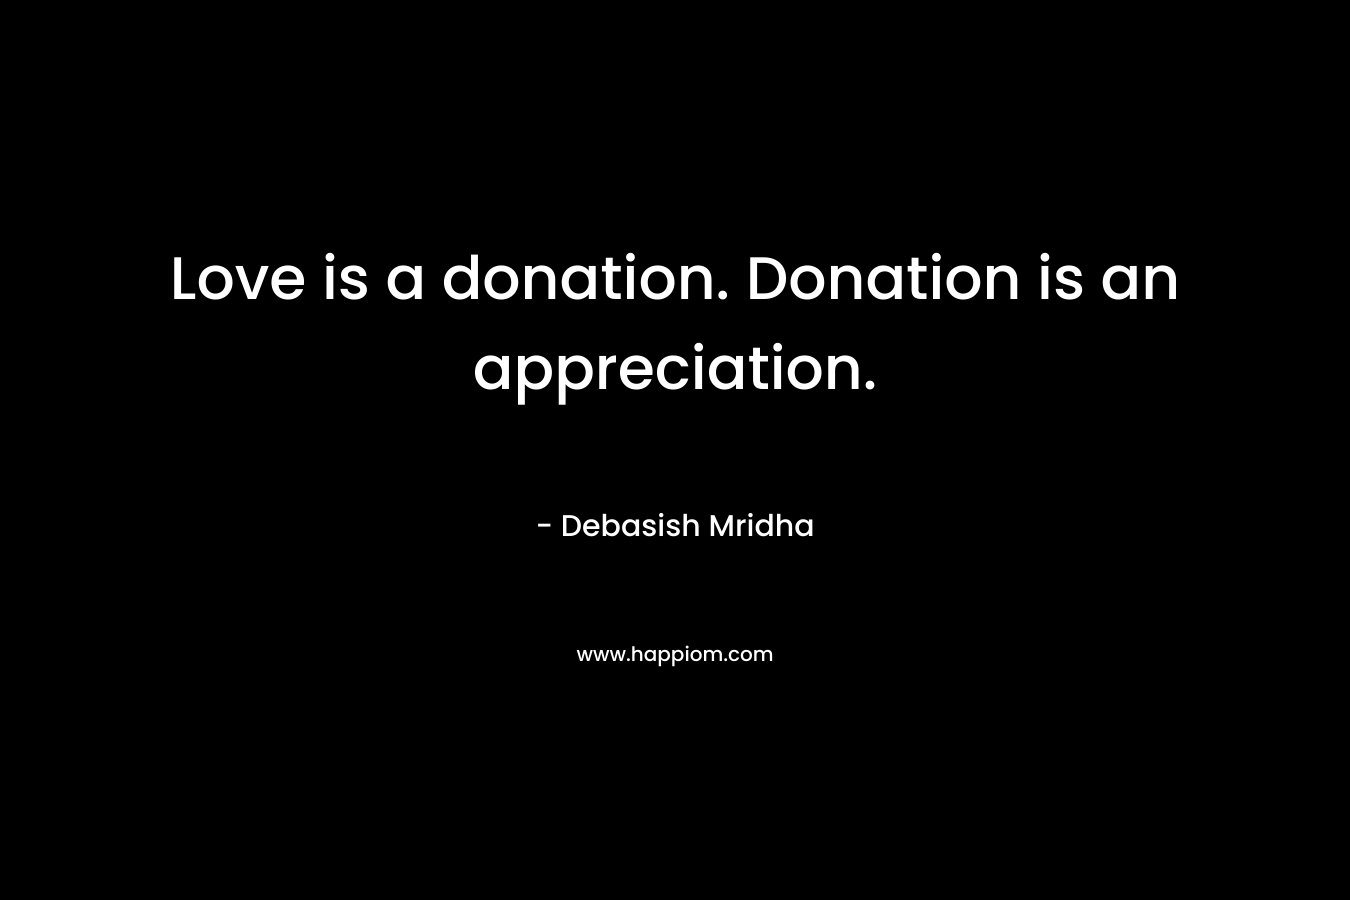 Love is a donation. Donation is an appreciation.